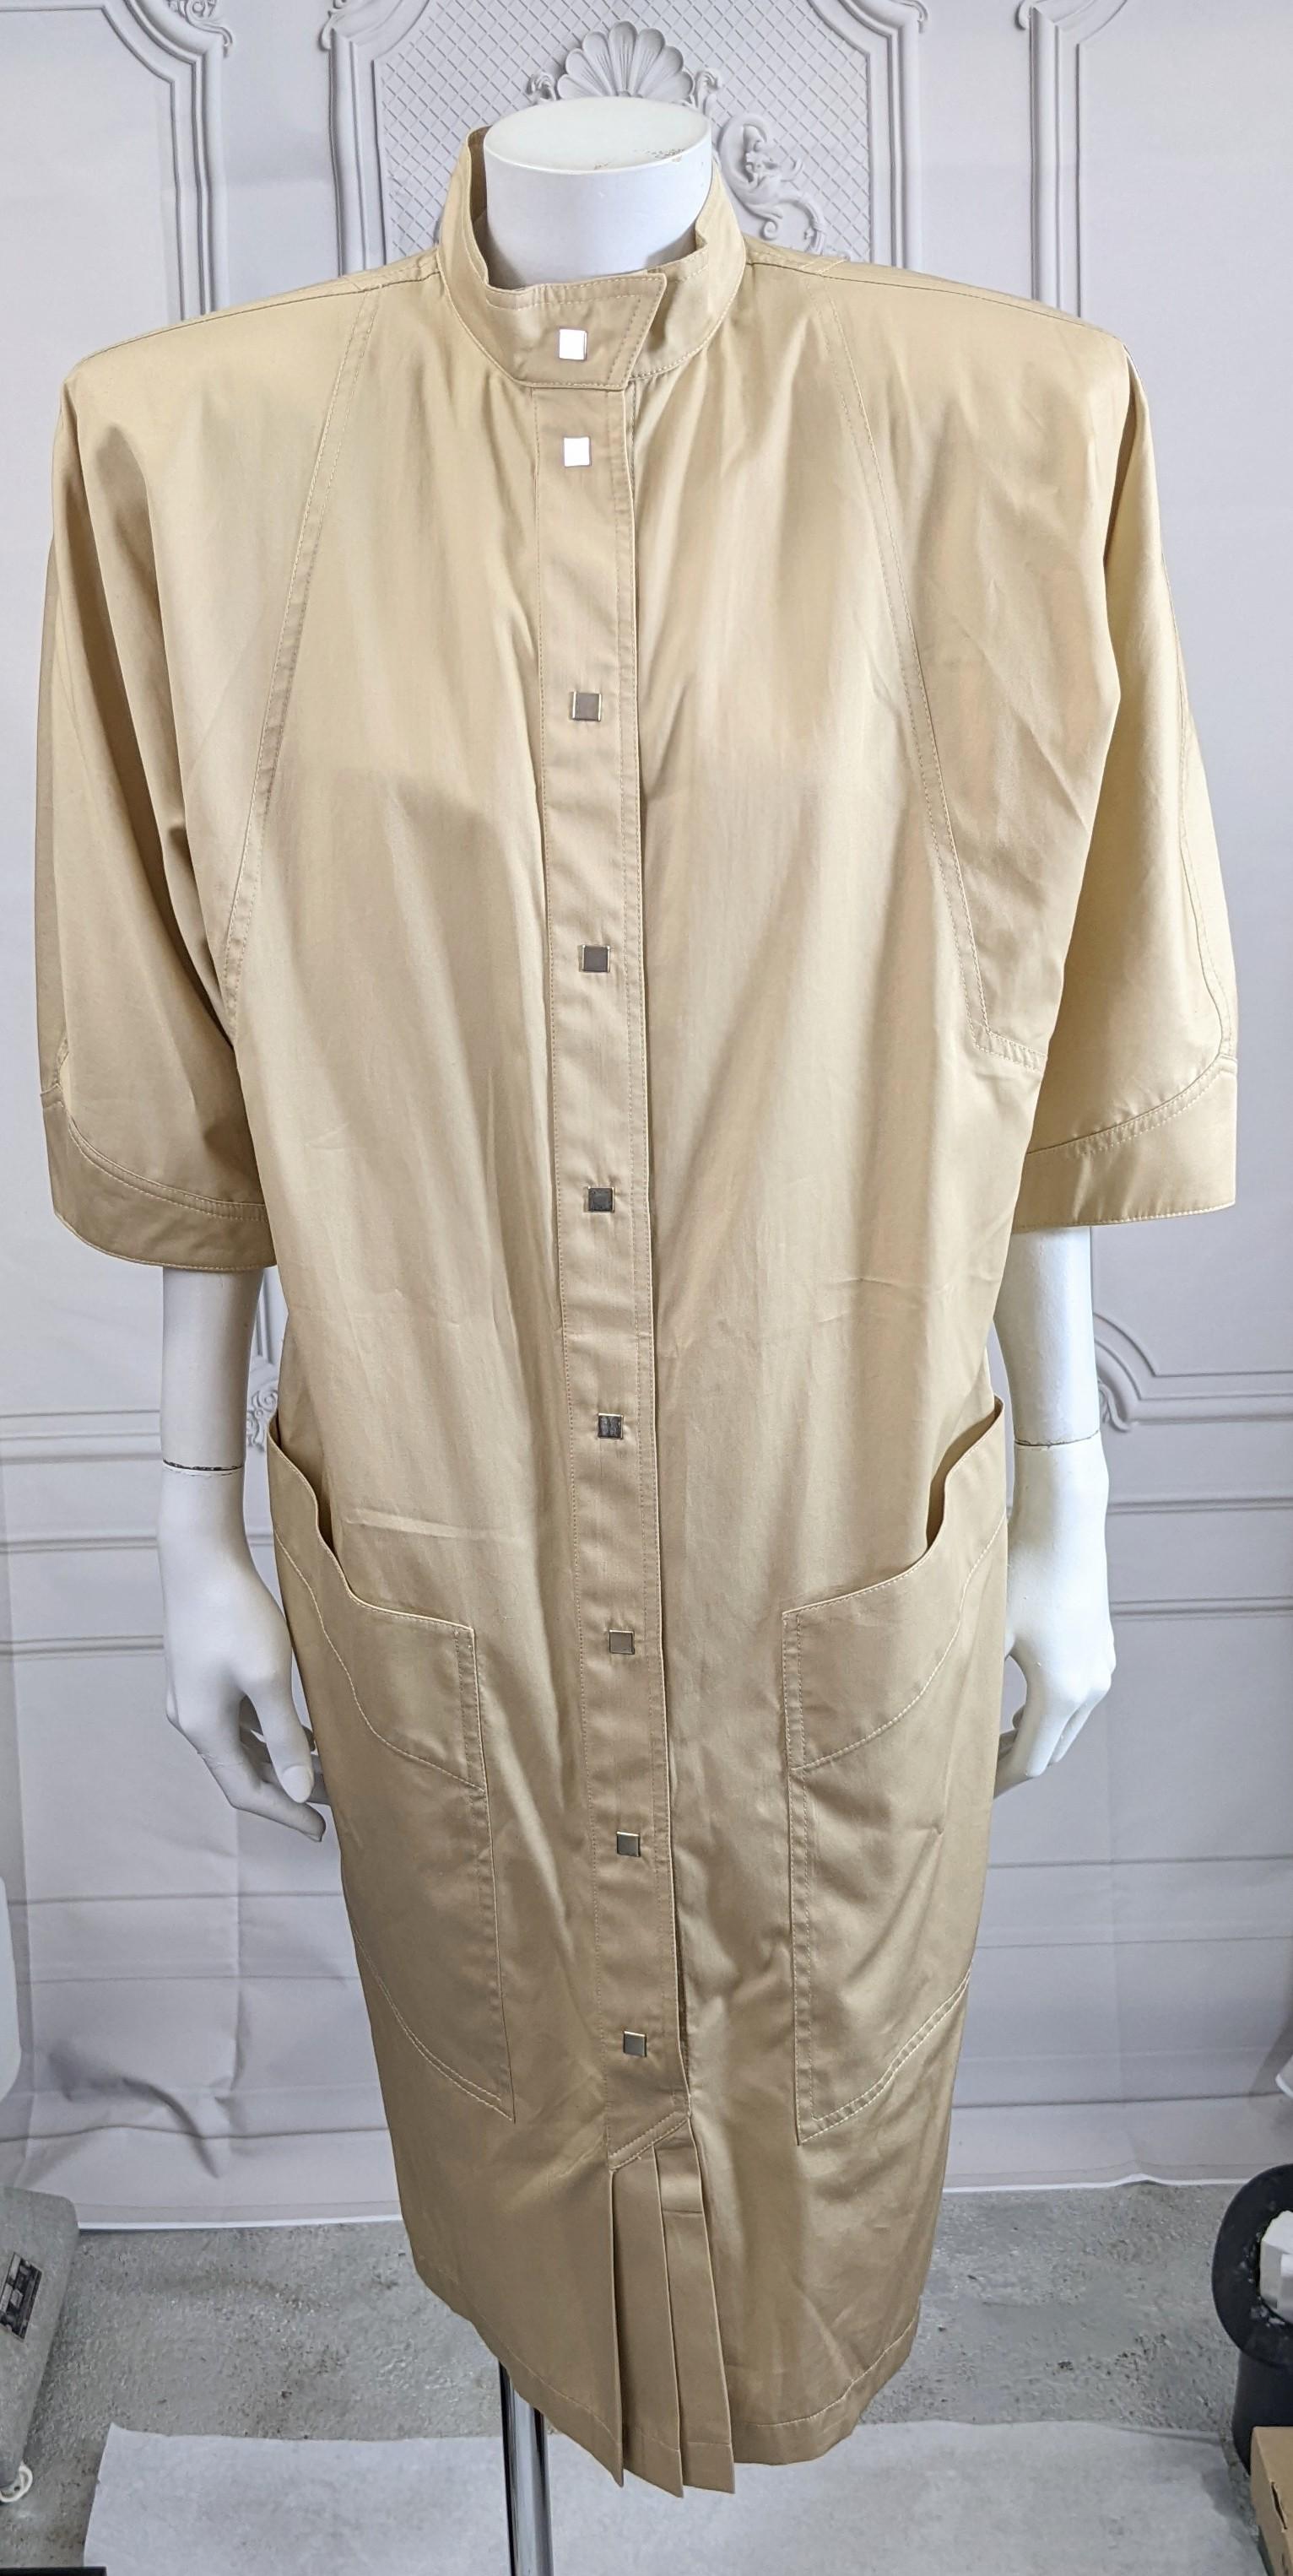 Statement Thierry Mugler Khaki Cotton Poplin Safari Dress with massive shoulder pads which tapers down to the hem. Front placket is closed with snaps to the knee where a series of pleats opens. Large important shoulders with cropped sleeves, and